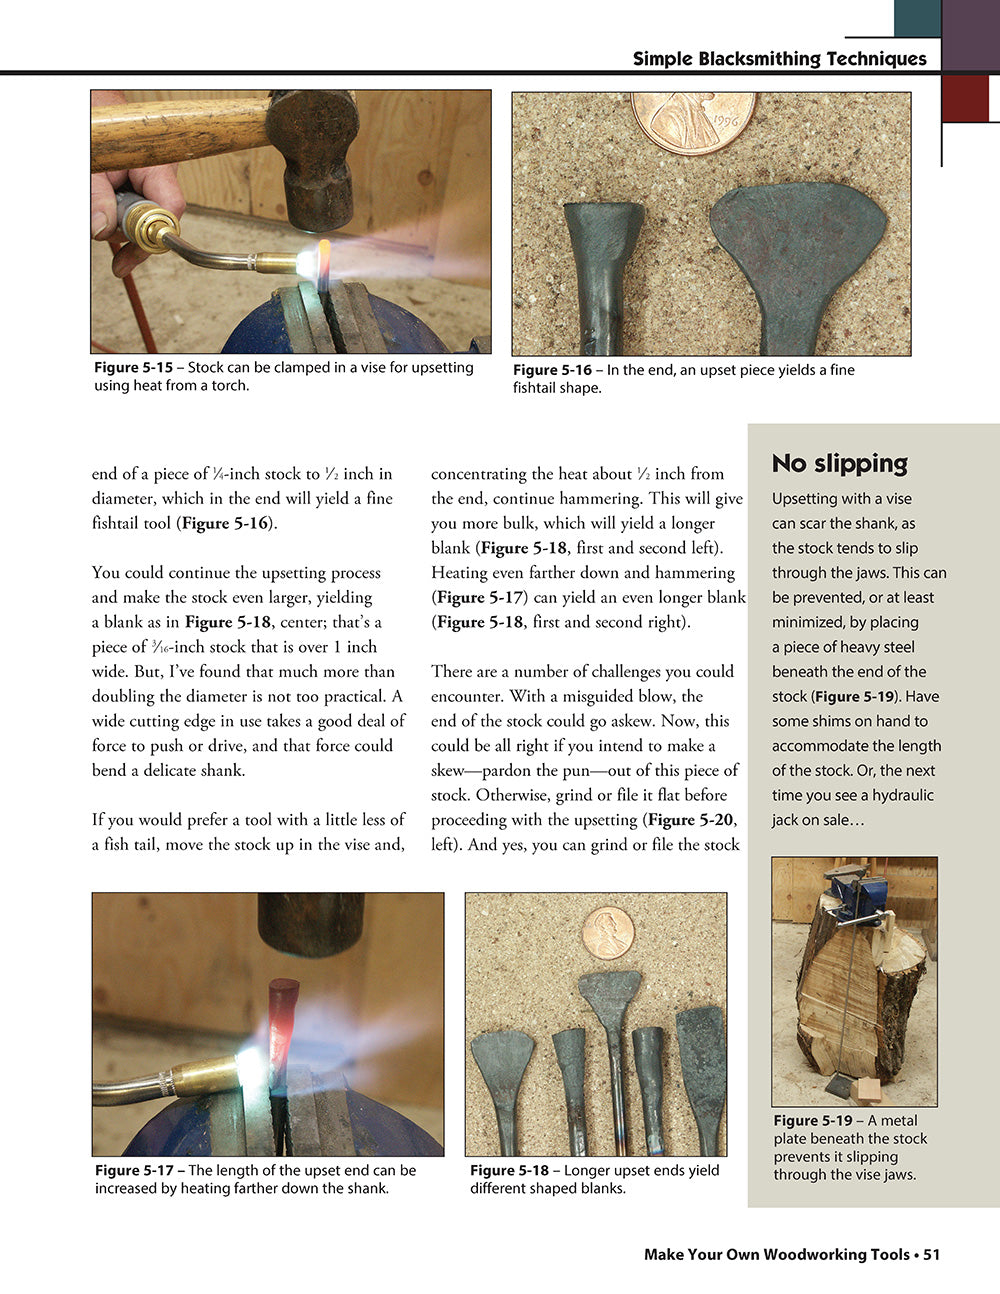 Make Your Own Woodworking Tools